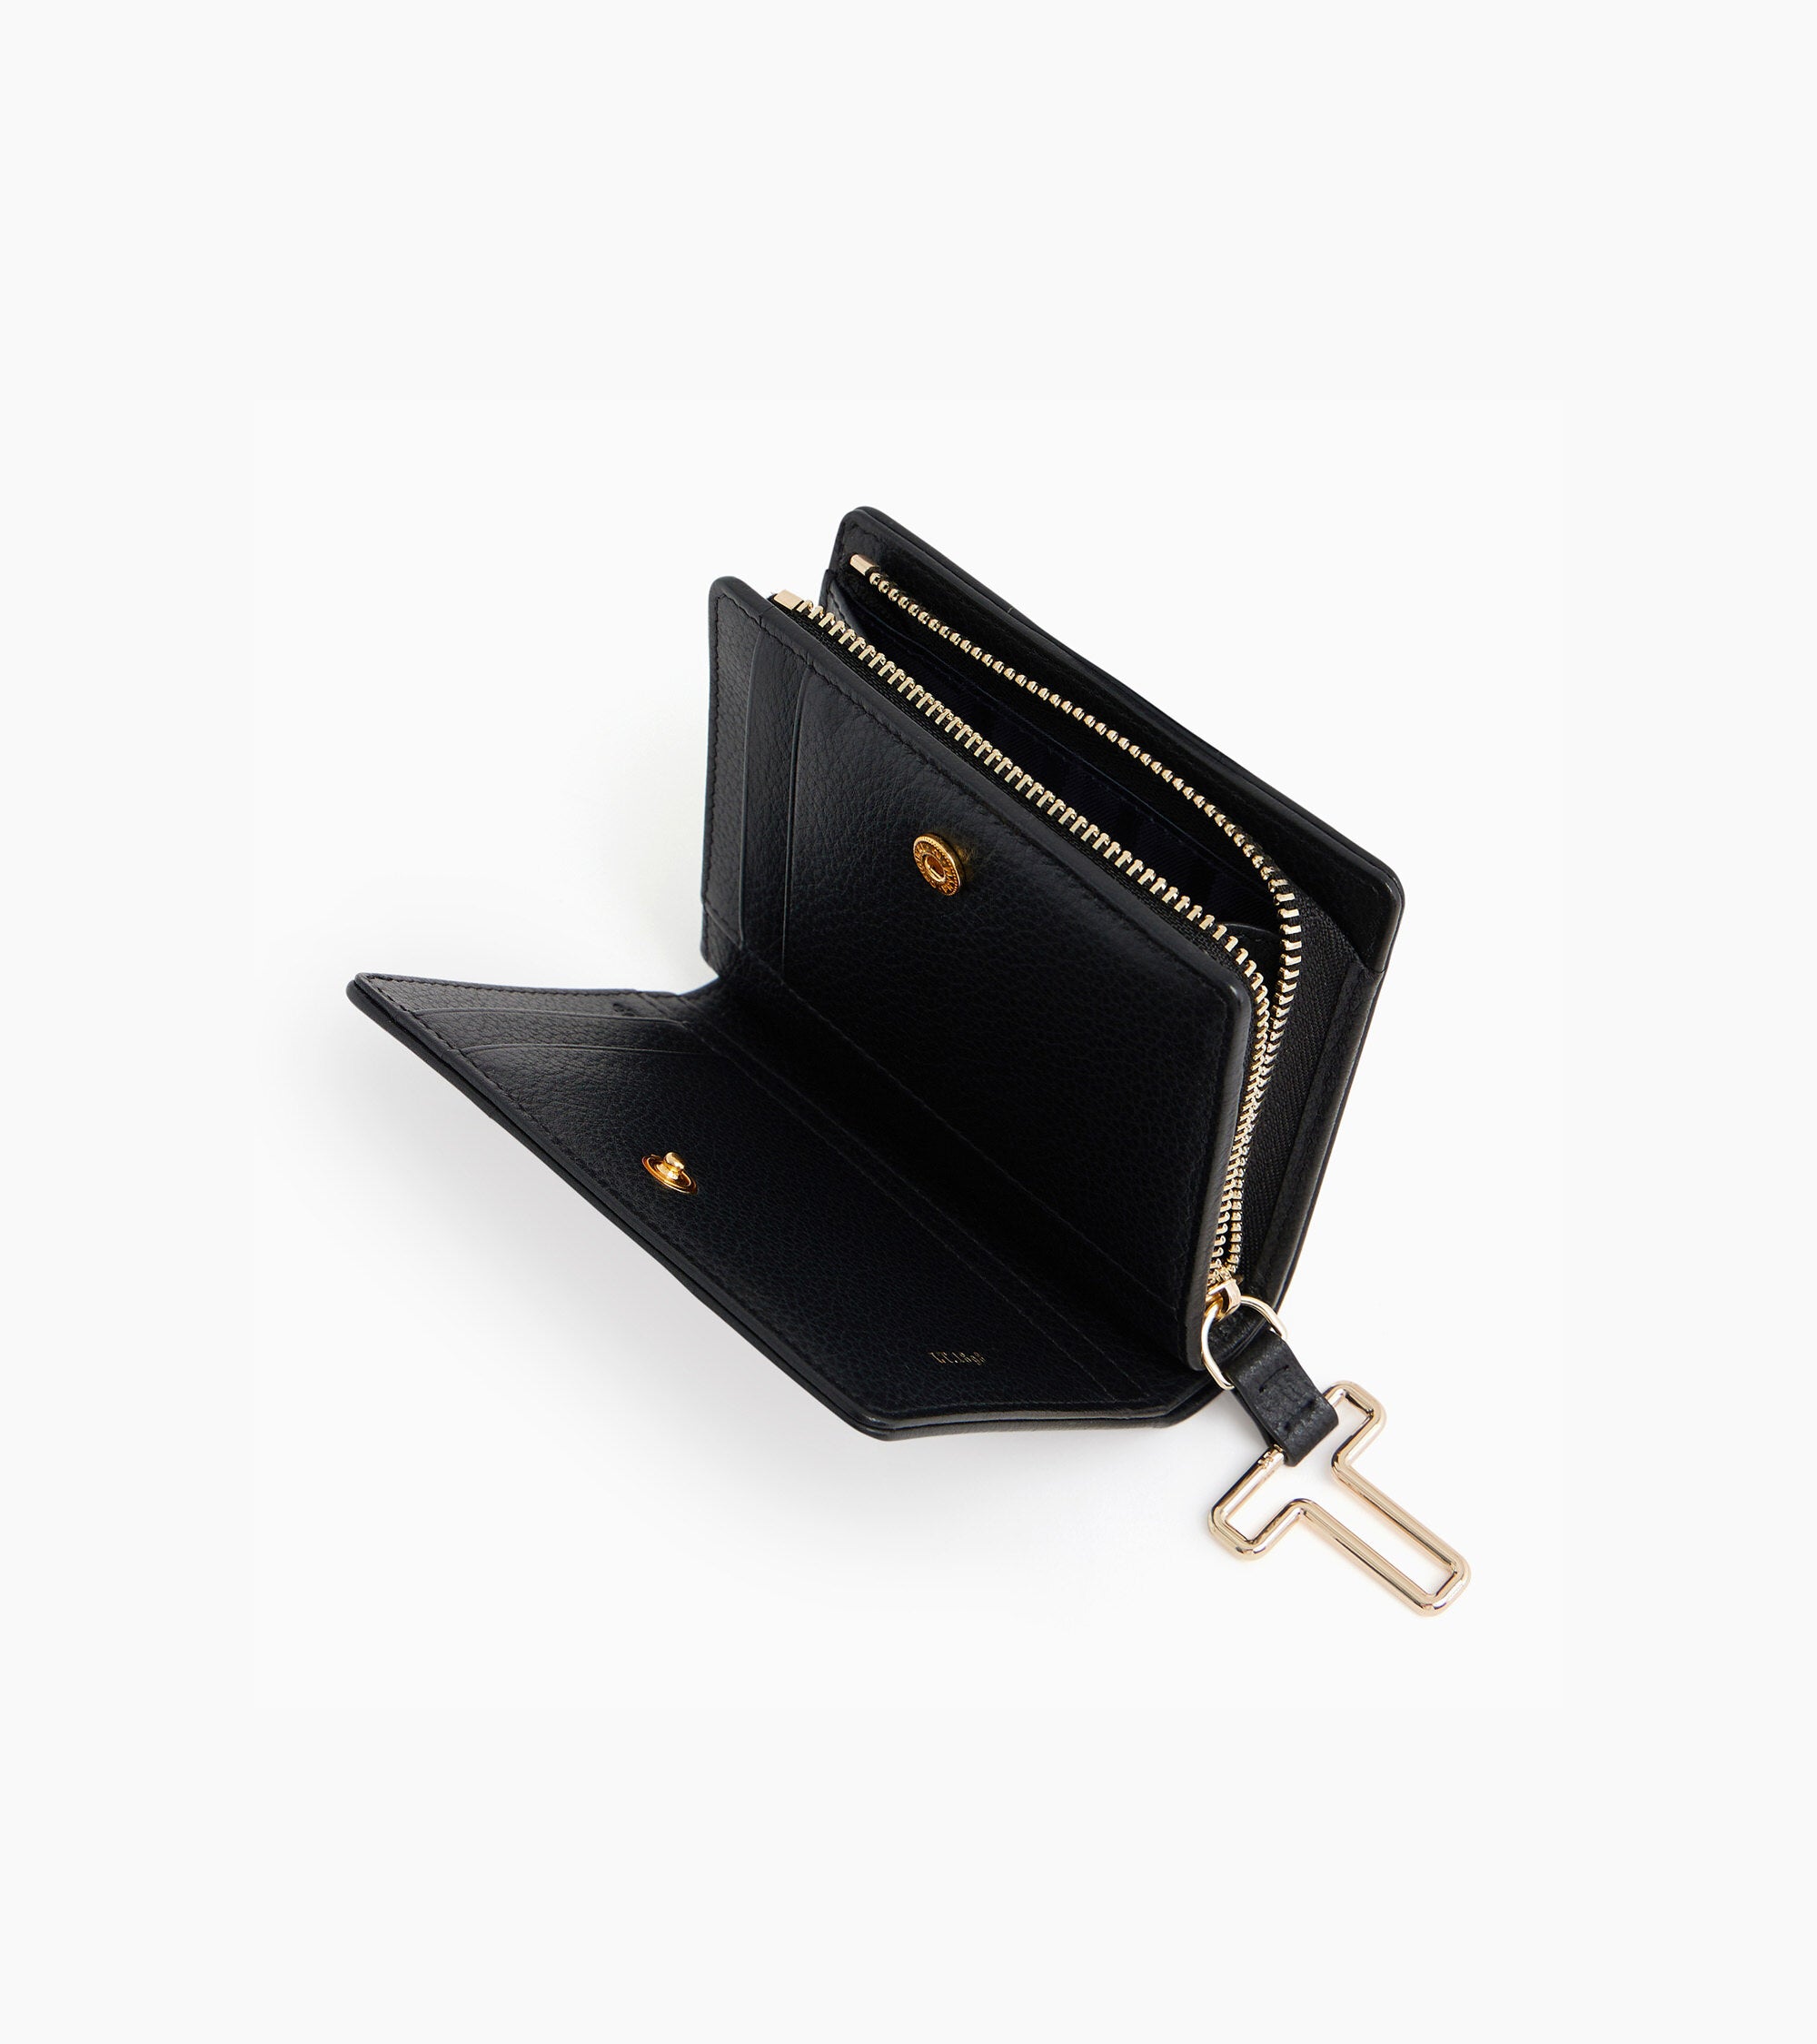 Juliette small grained leather purse